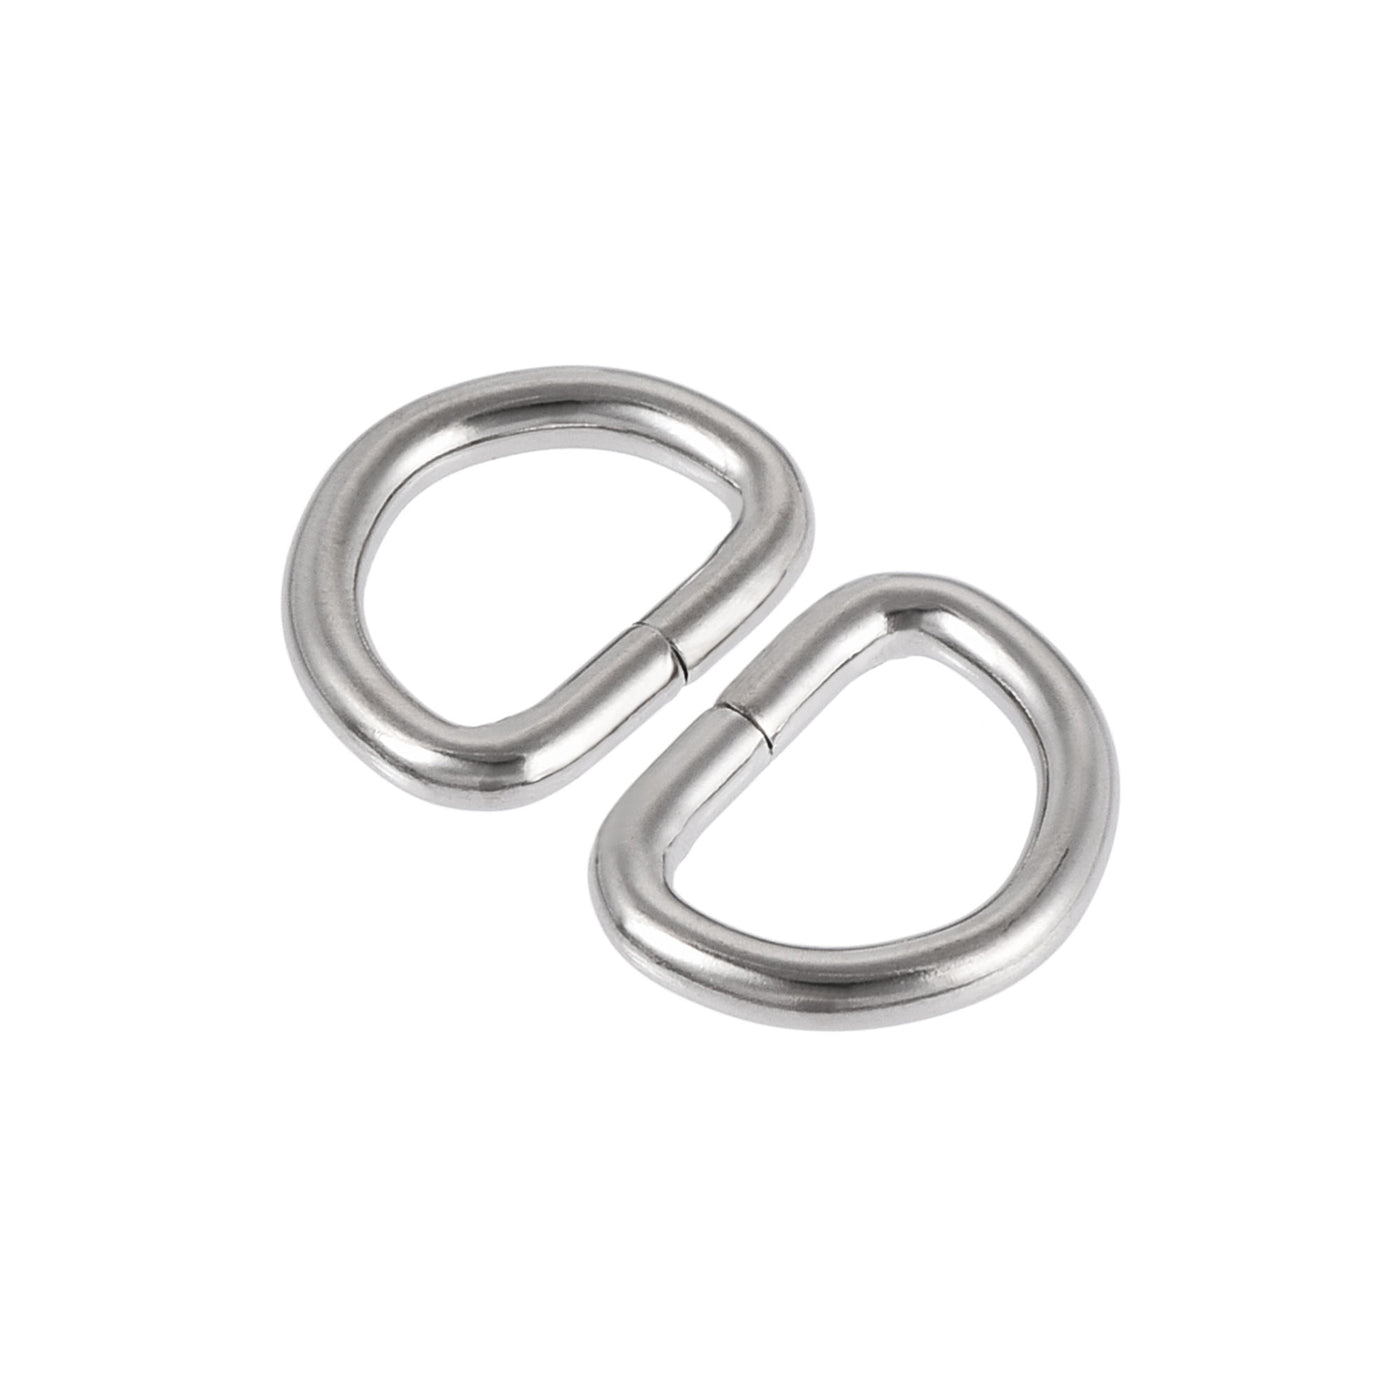 uxcell Uxcell Metal D Ring 0.51"(13mm) D-Rings Buckle for Hardware Bags Belts Craft DIY Accessories Silver Tone 50pcs